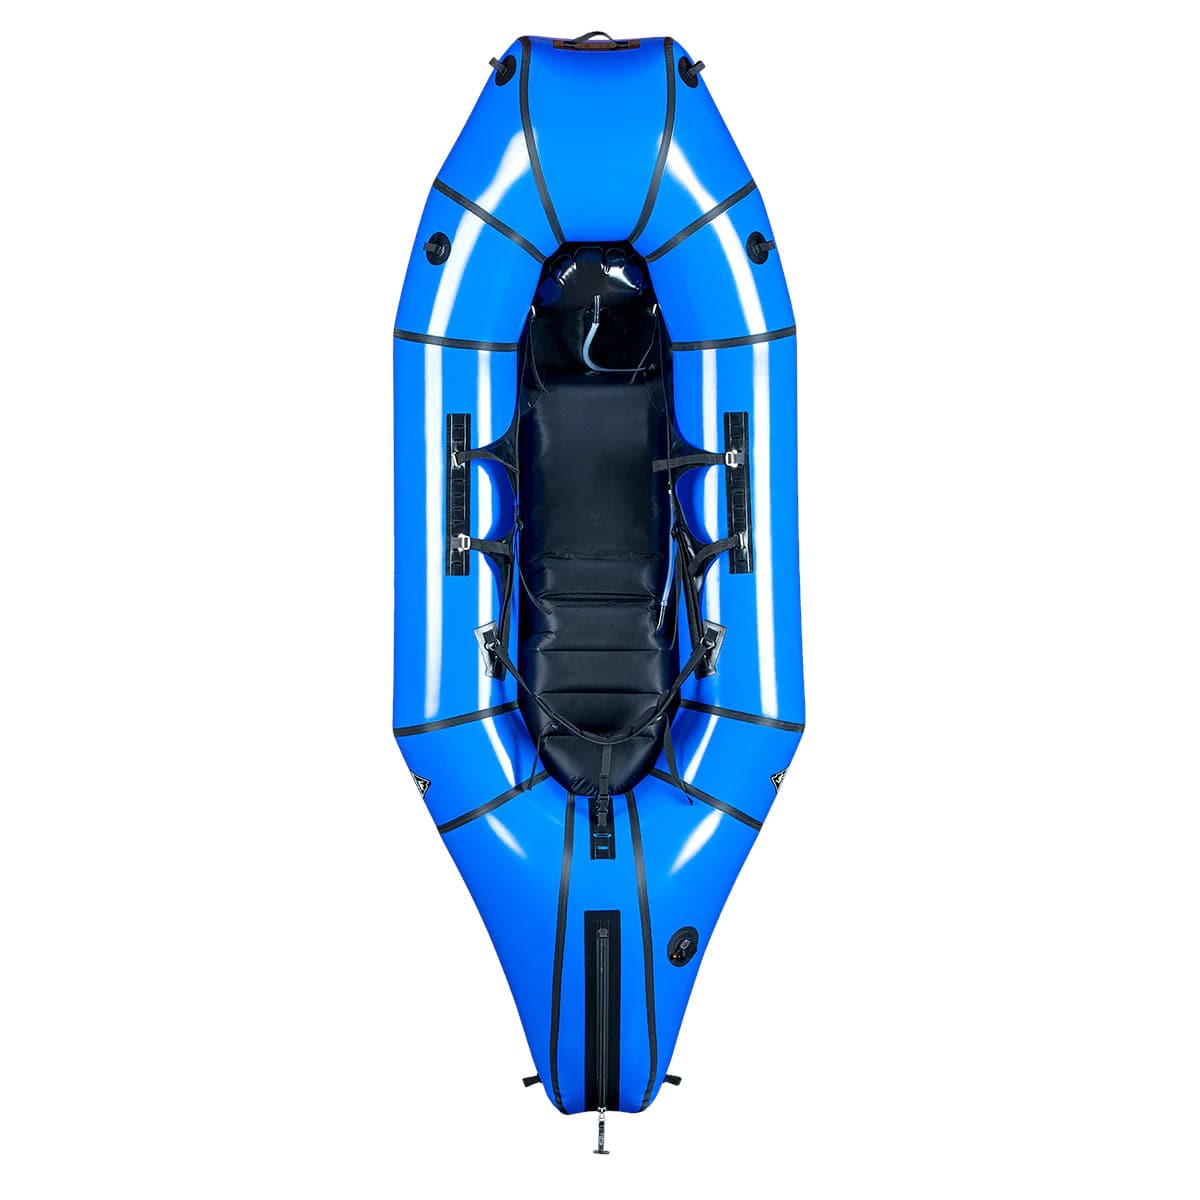 Featuring the GnarMule pack raft, pack rafting manufactured by Alpacka shown here from a fifth angle.